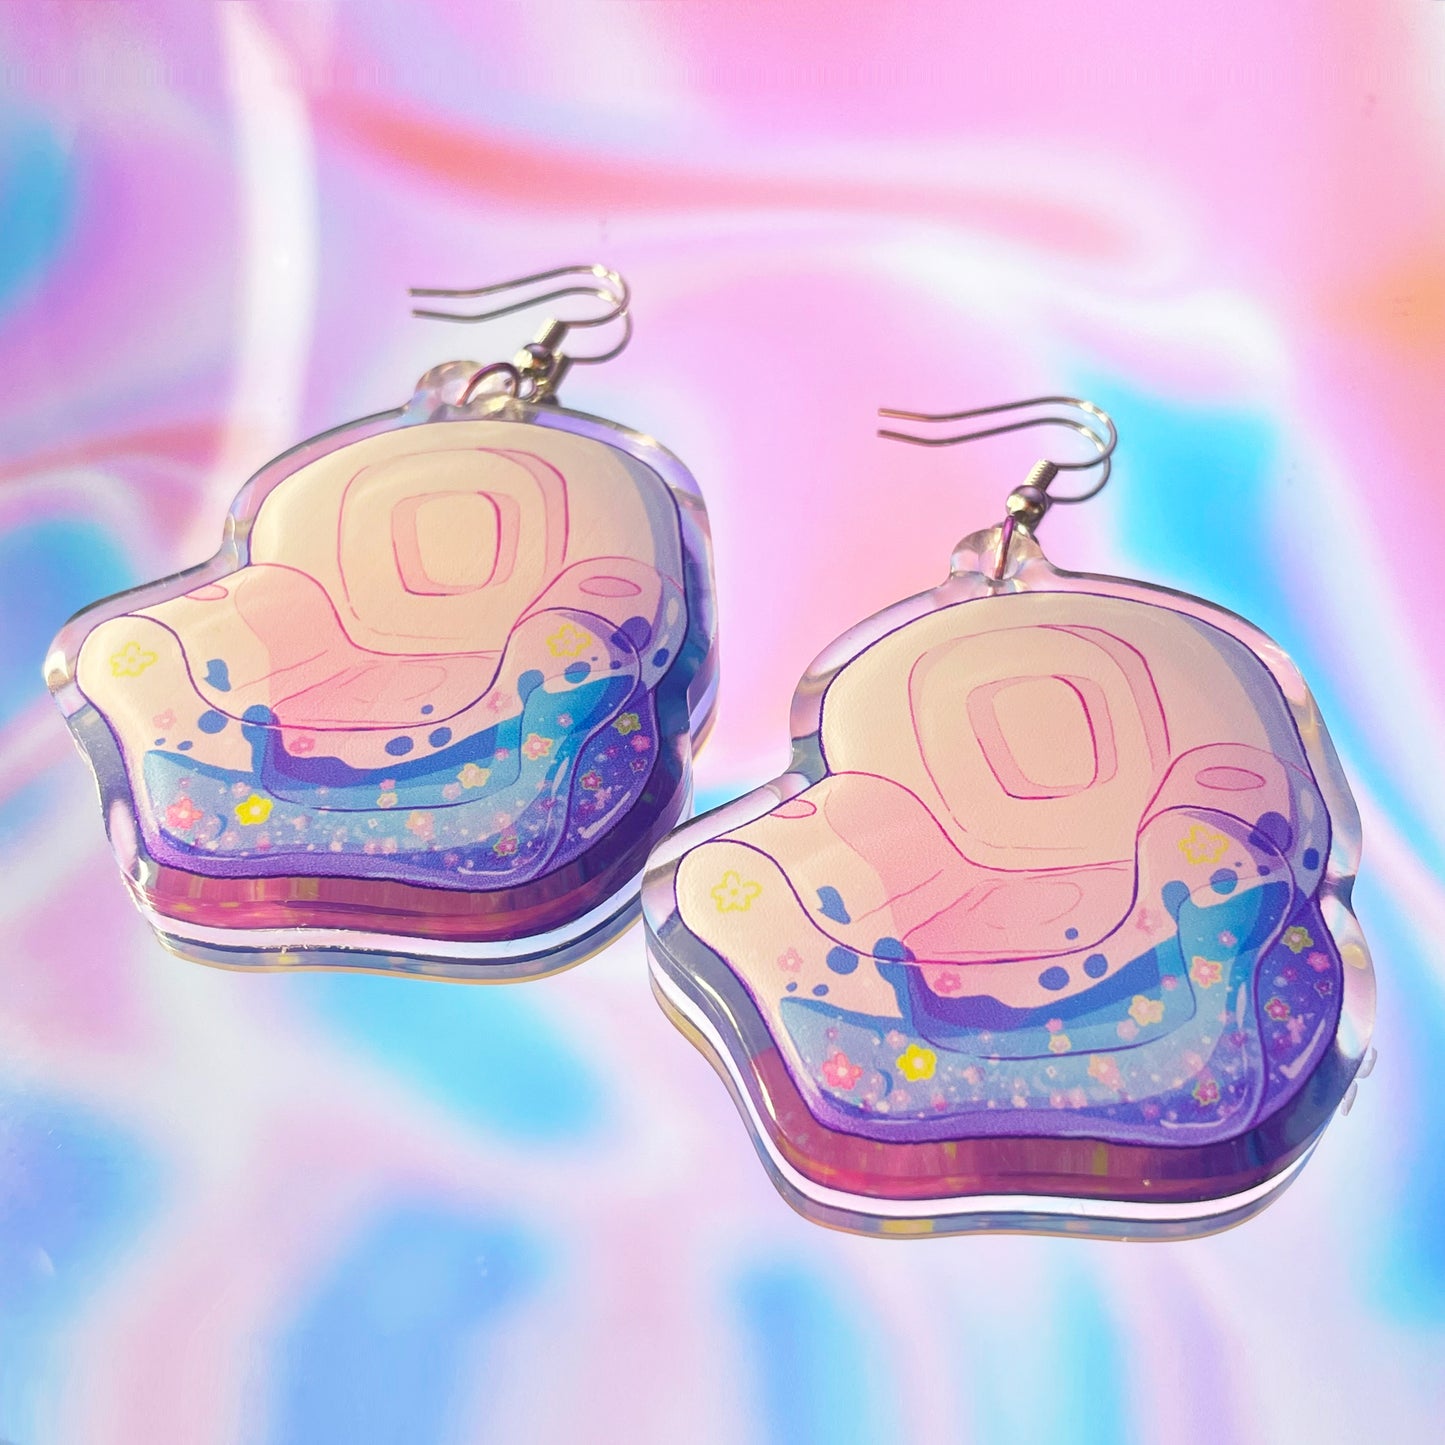 90s Inflatable Chair Earrings